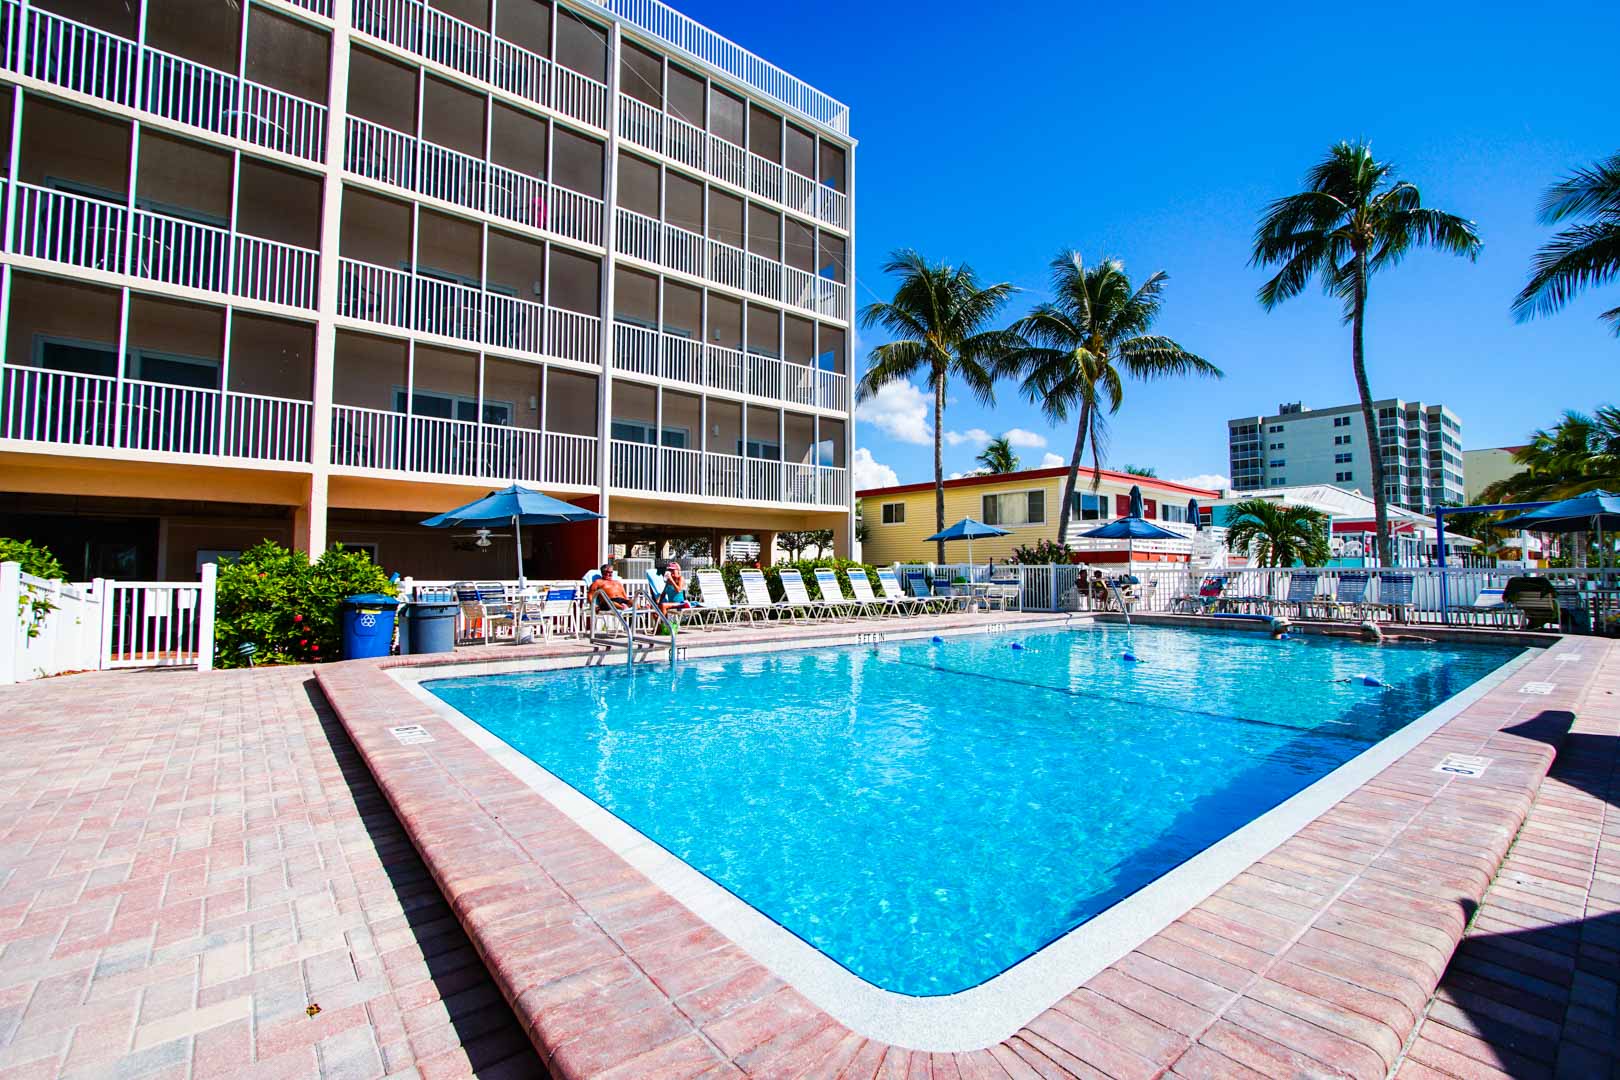 A crisp outdoor swimming pool at VRI's Windward Passage Resort in Fort Myers Beach, Florida.